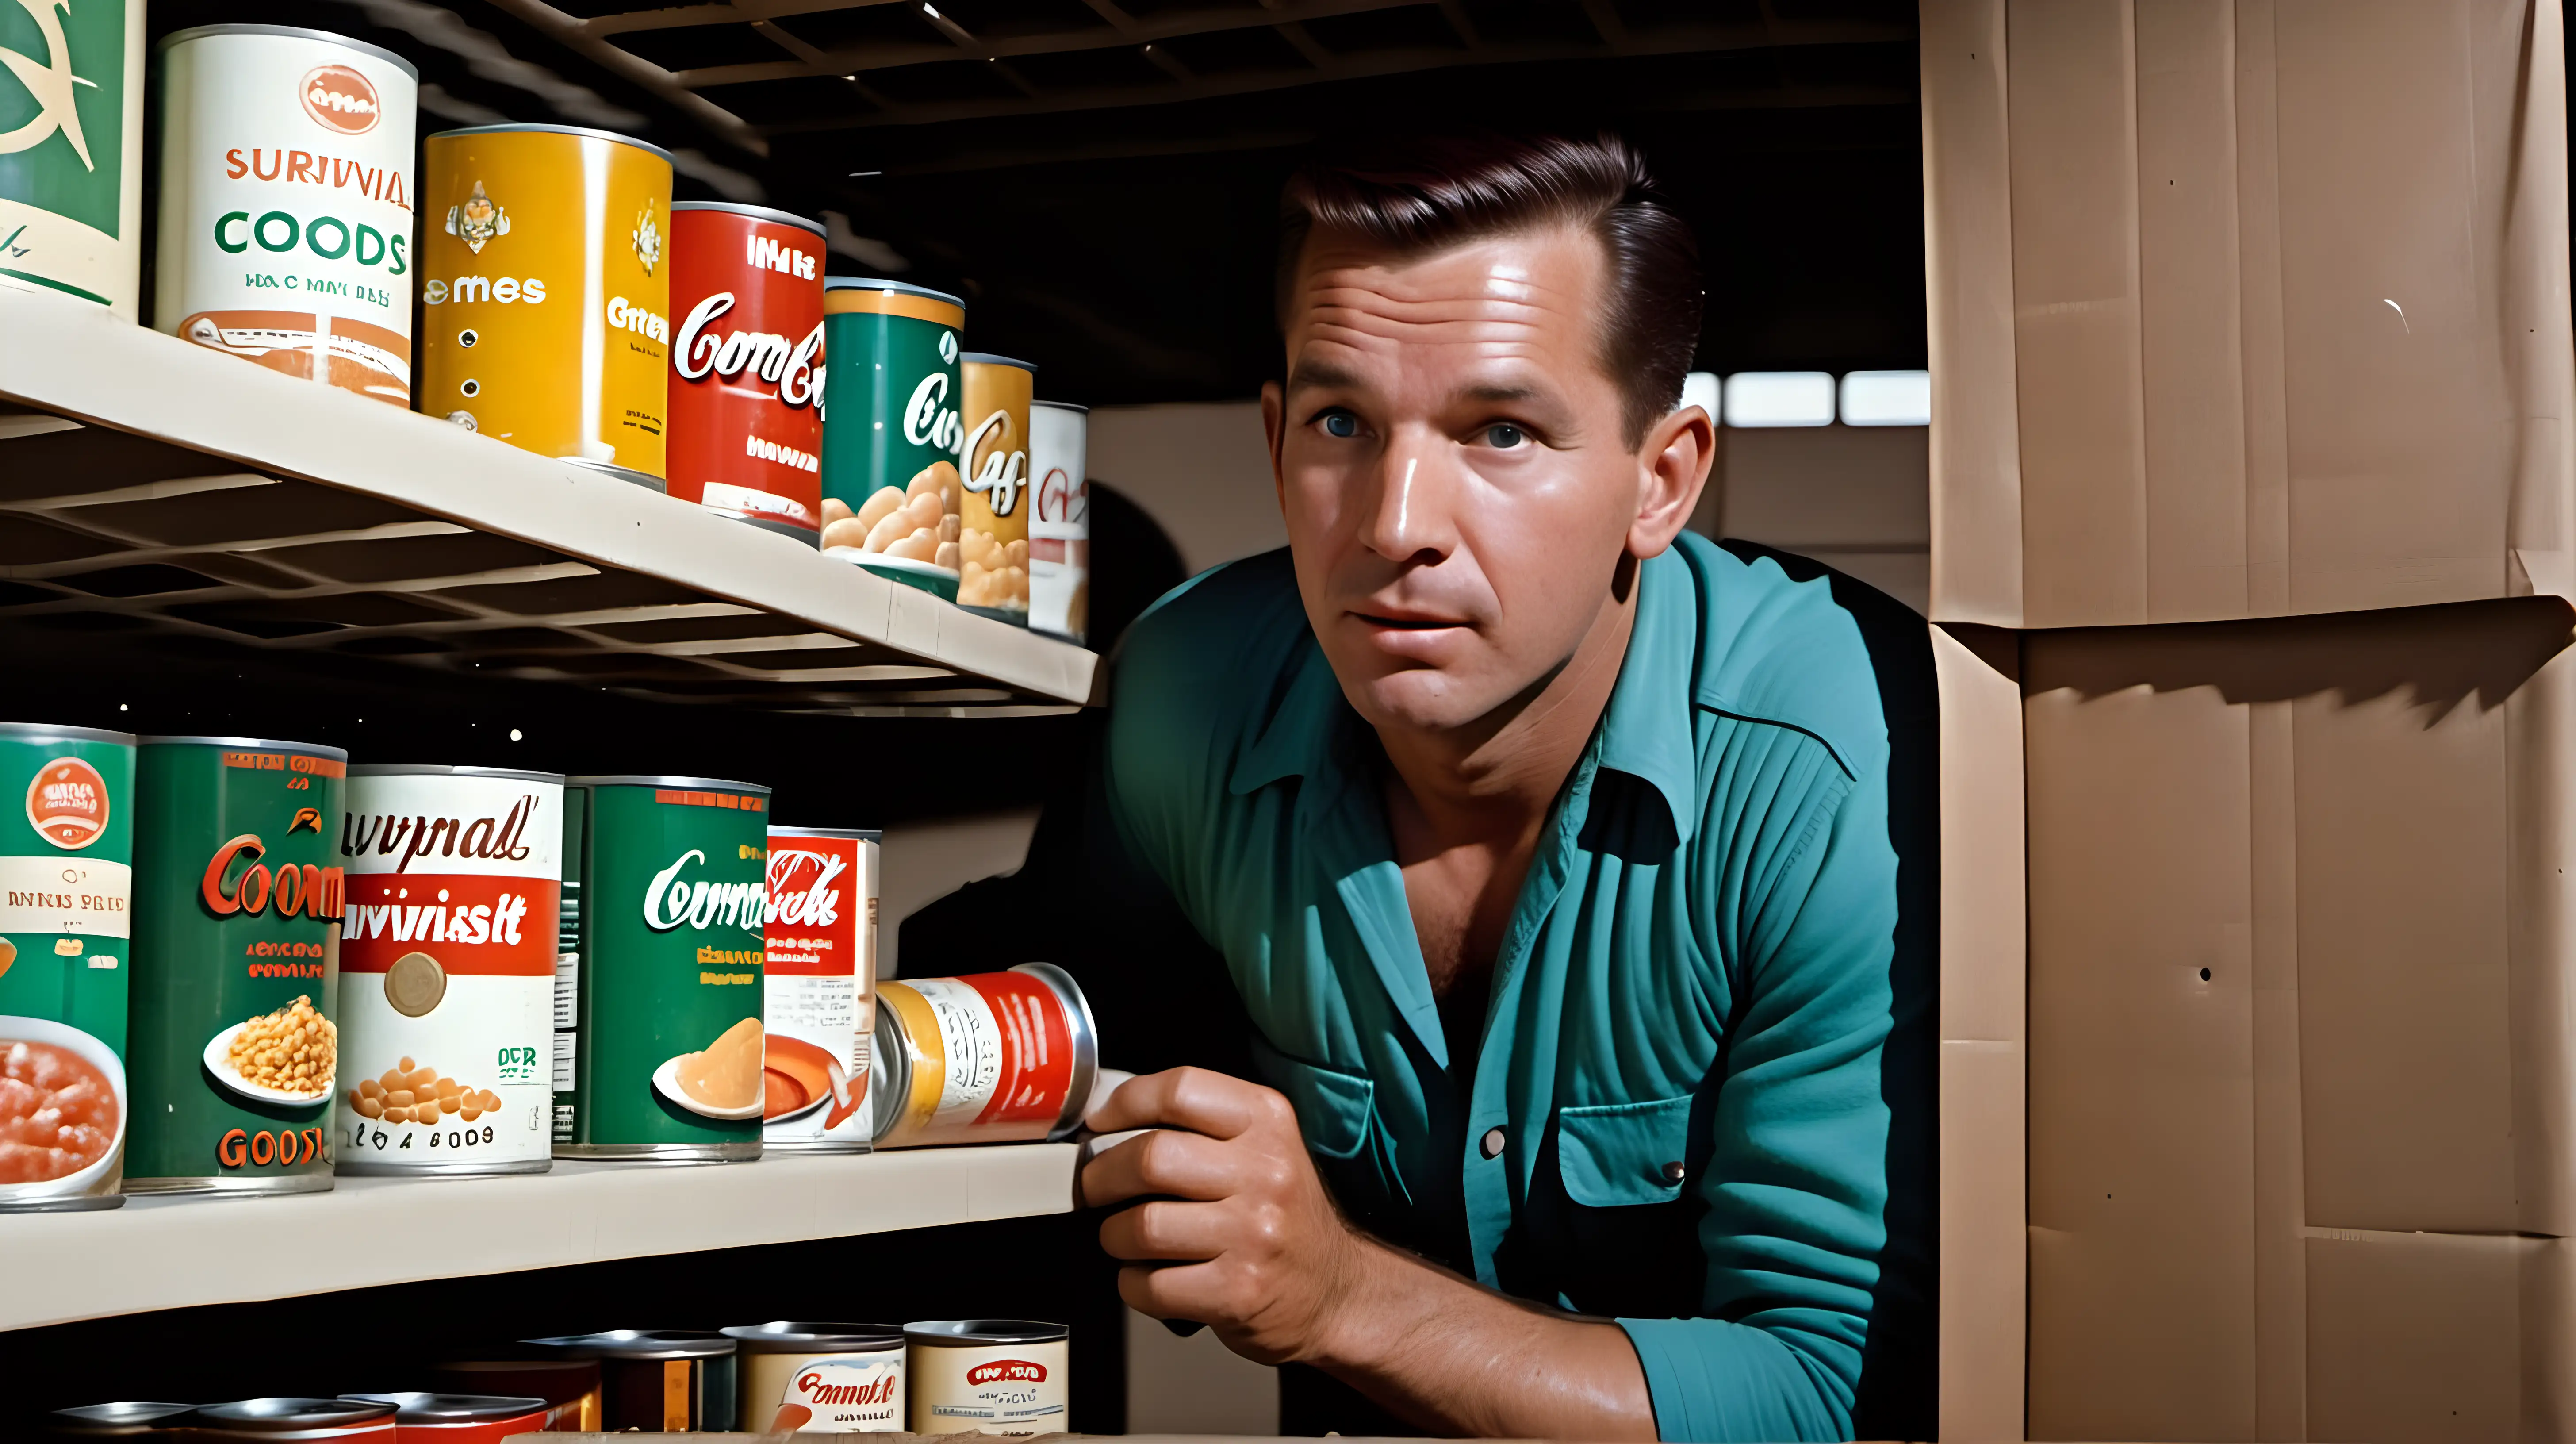 1960s Survivalist Man in Bunker with Canned Goods